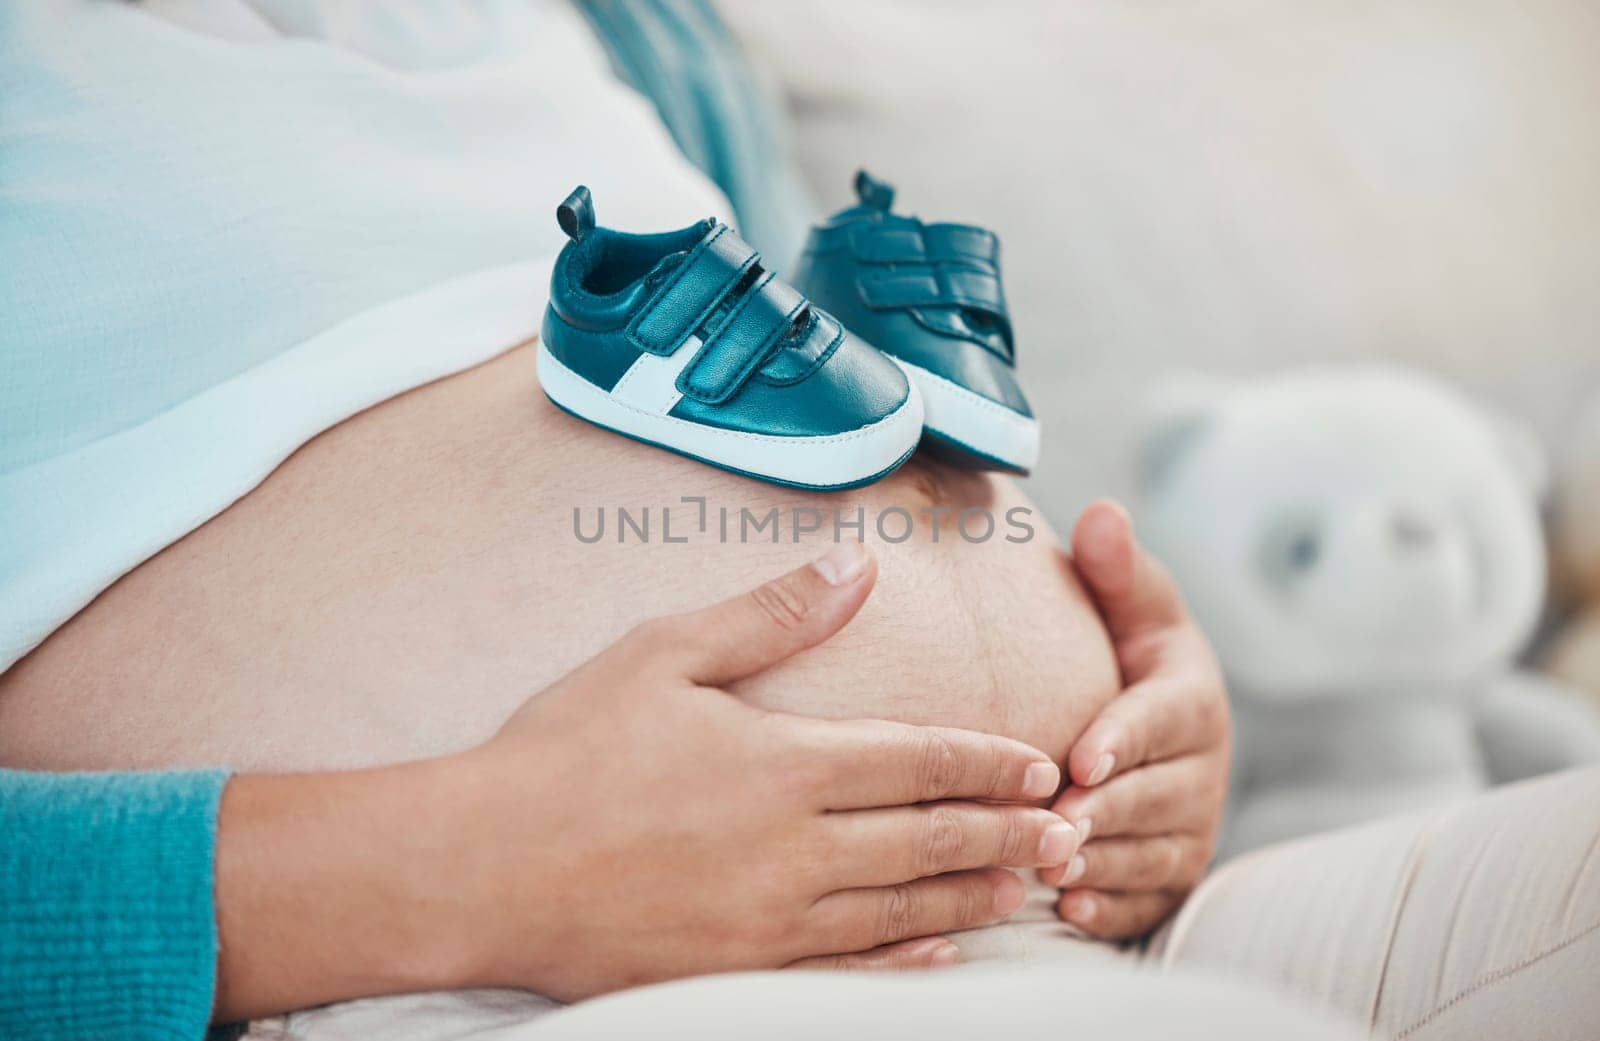 Mother with pregnant stomach in hands, shoes for baby with pregnancy, relax and waiting for birth with love and hope for healthy child. Woman, prenatal care and mom at family home, ready for newborn